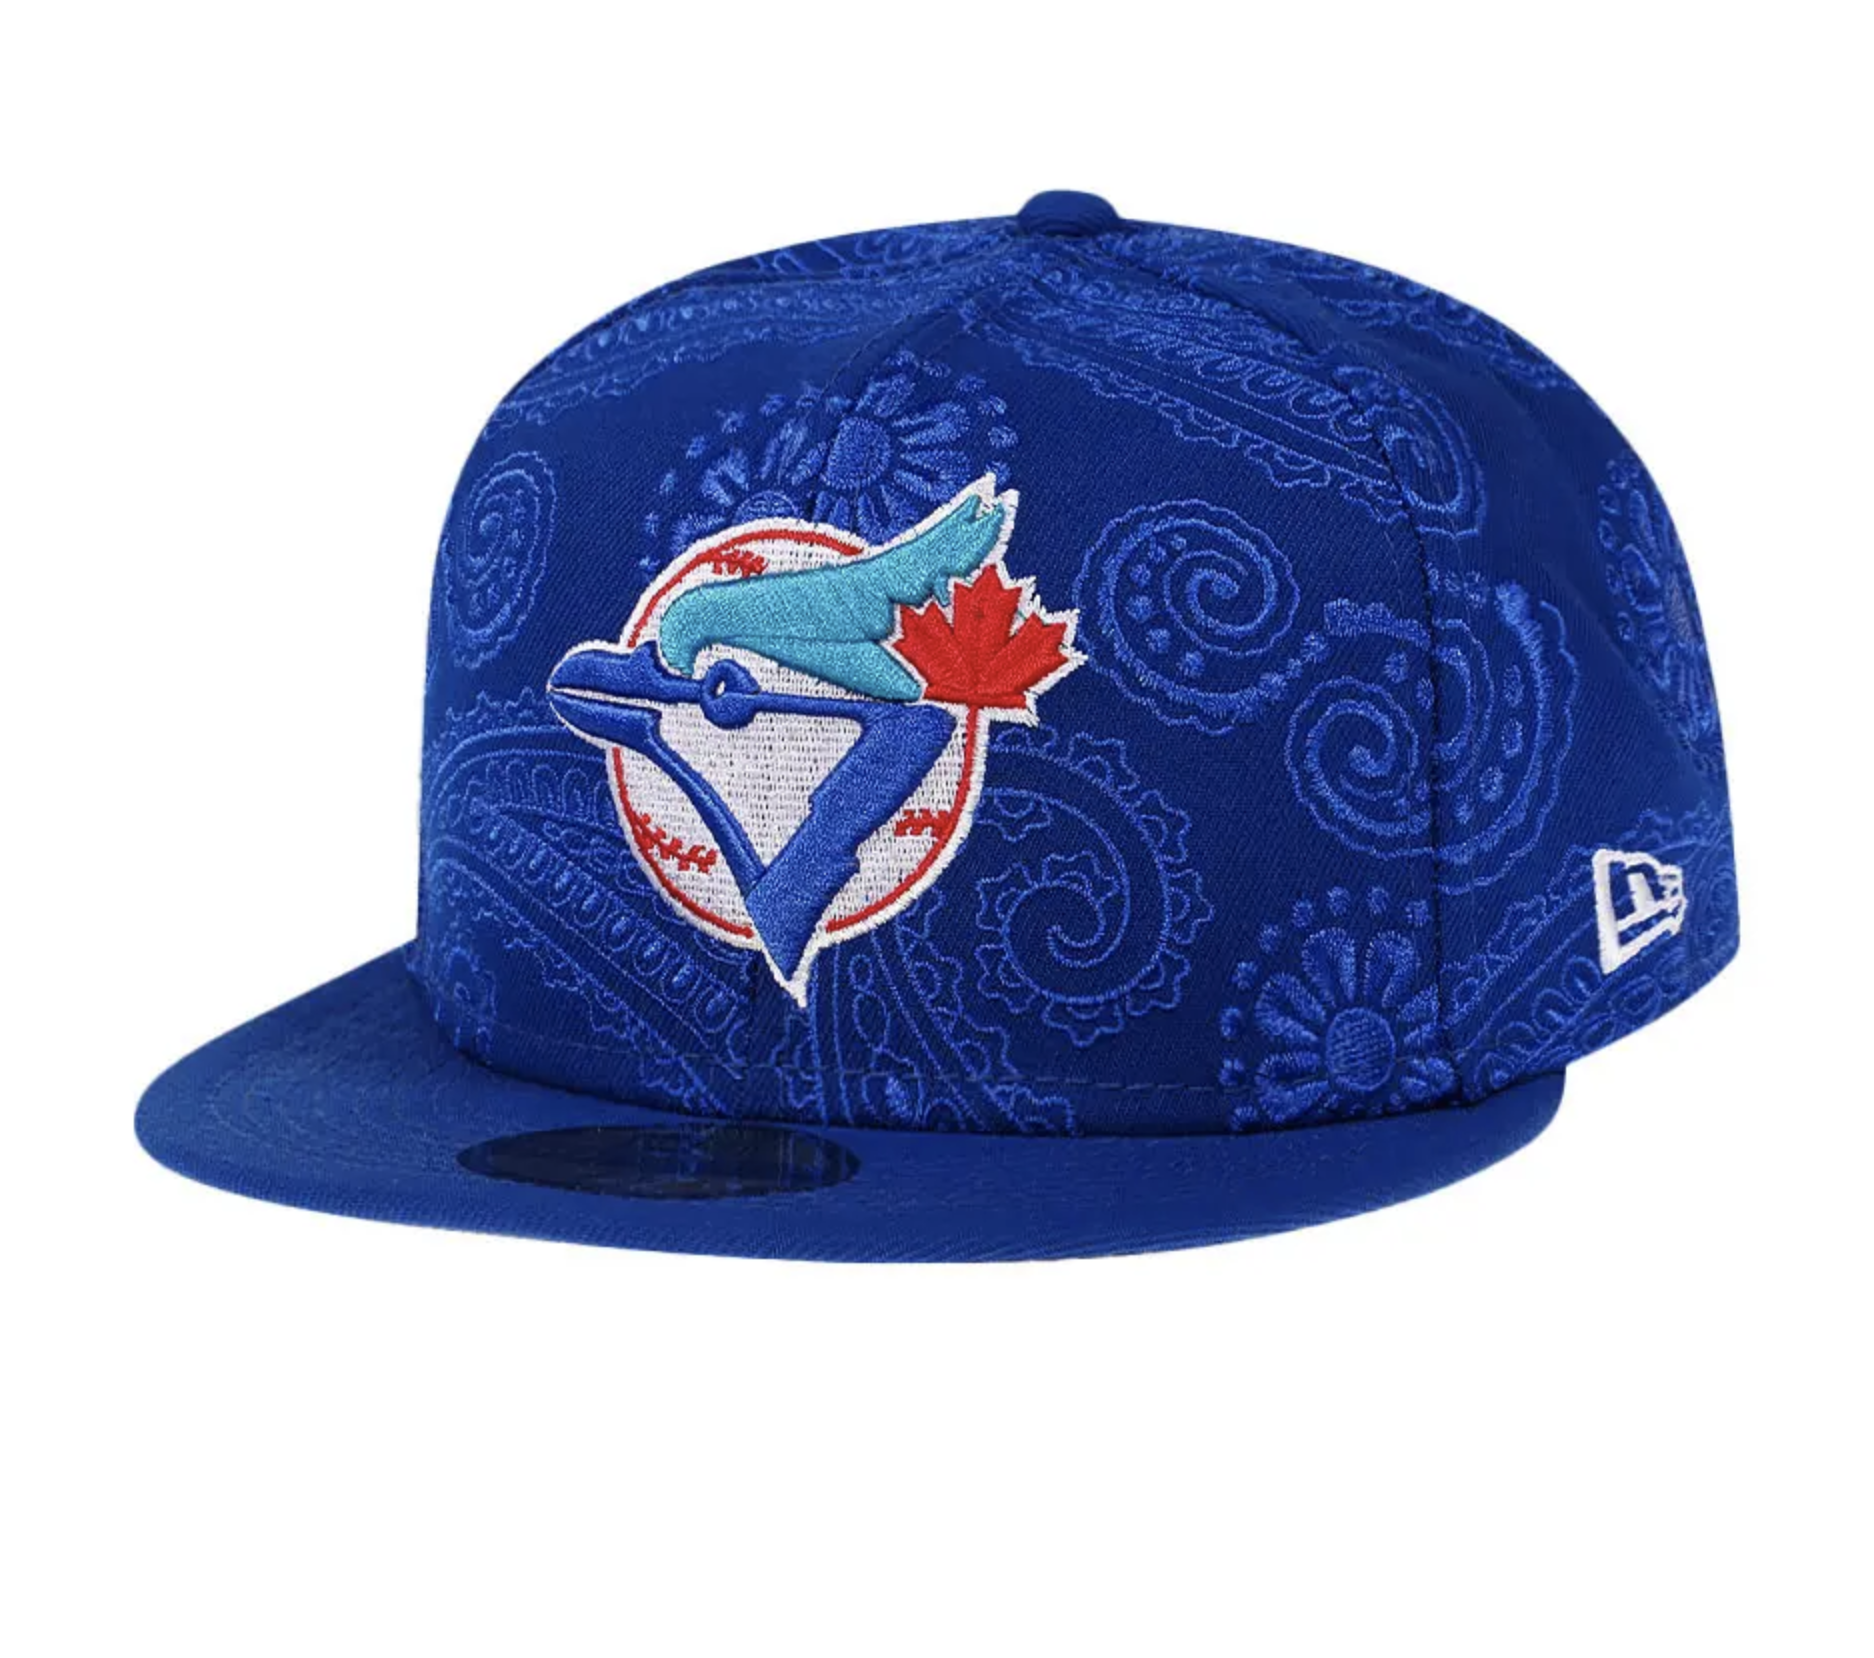 New Era 59FIFTY Toronto Bluejays Swirl Fitted Hat Royal Blue